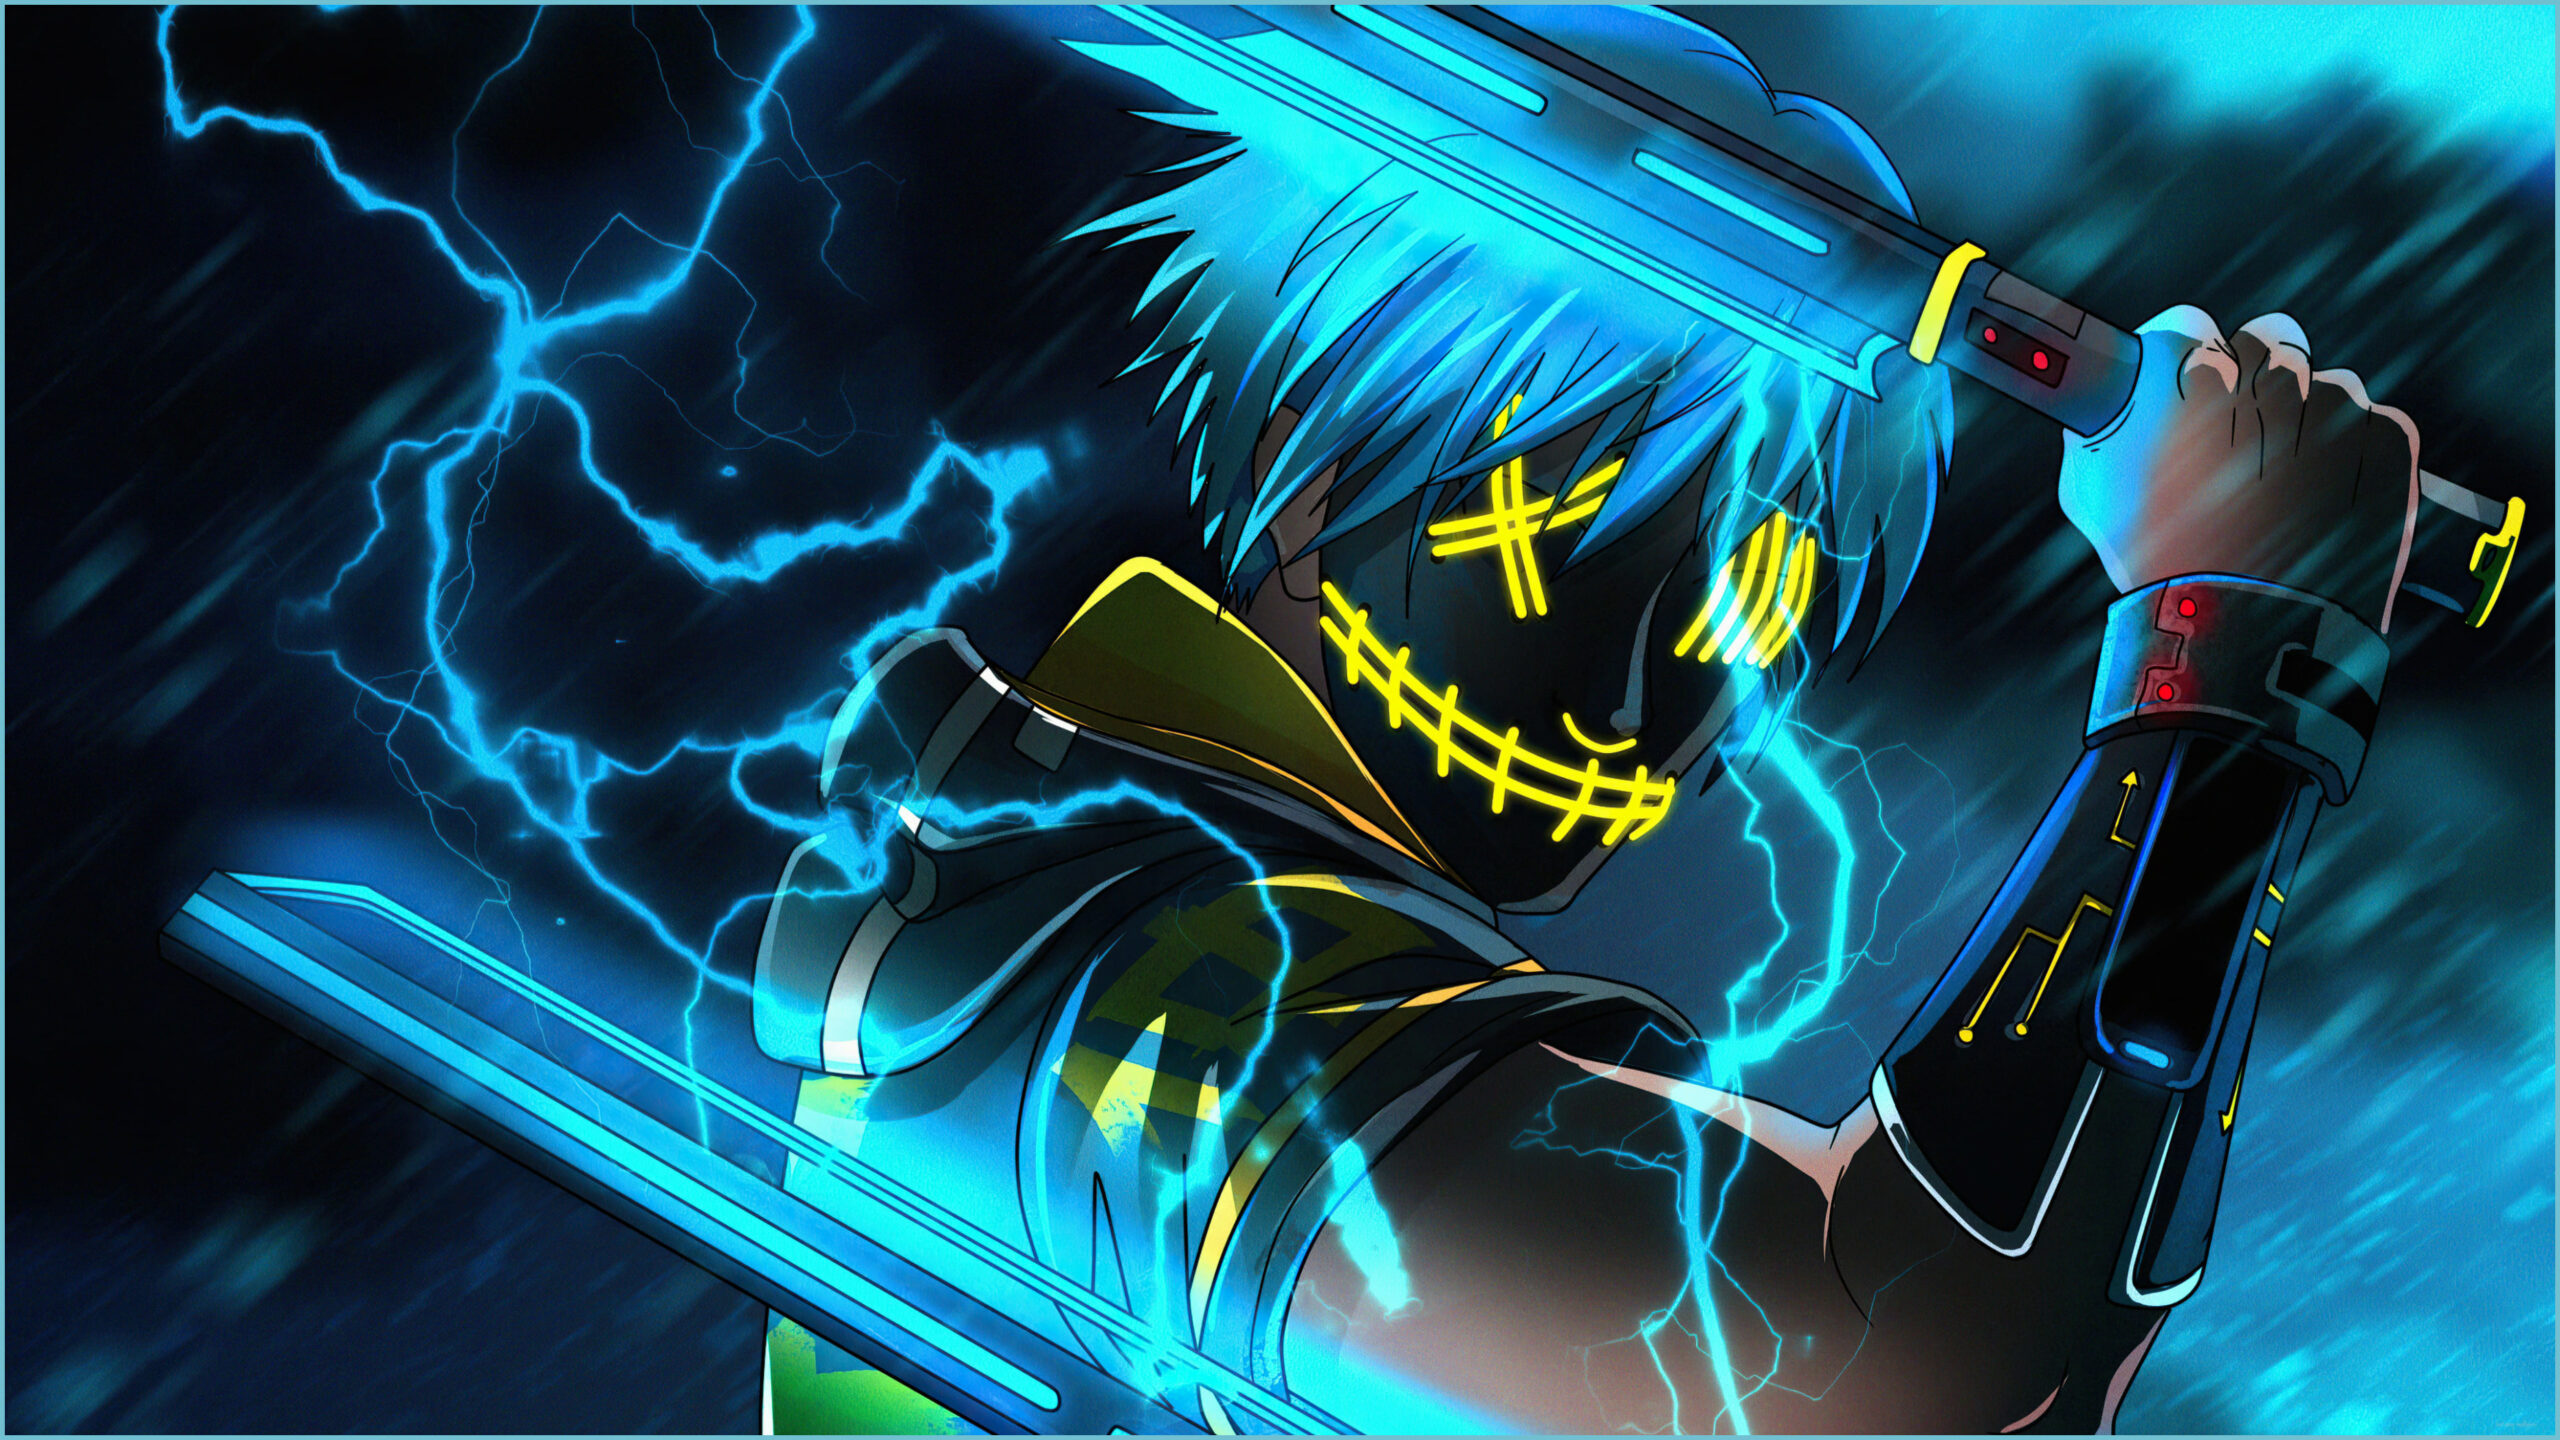 26 Good Anime Profile Photos, Pictures And Background Images For Free  Download - Pngtree